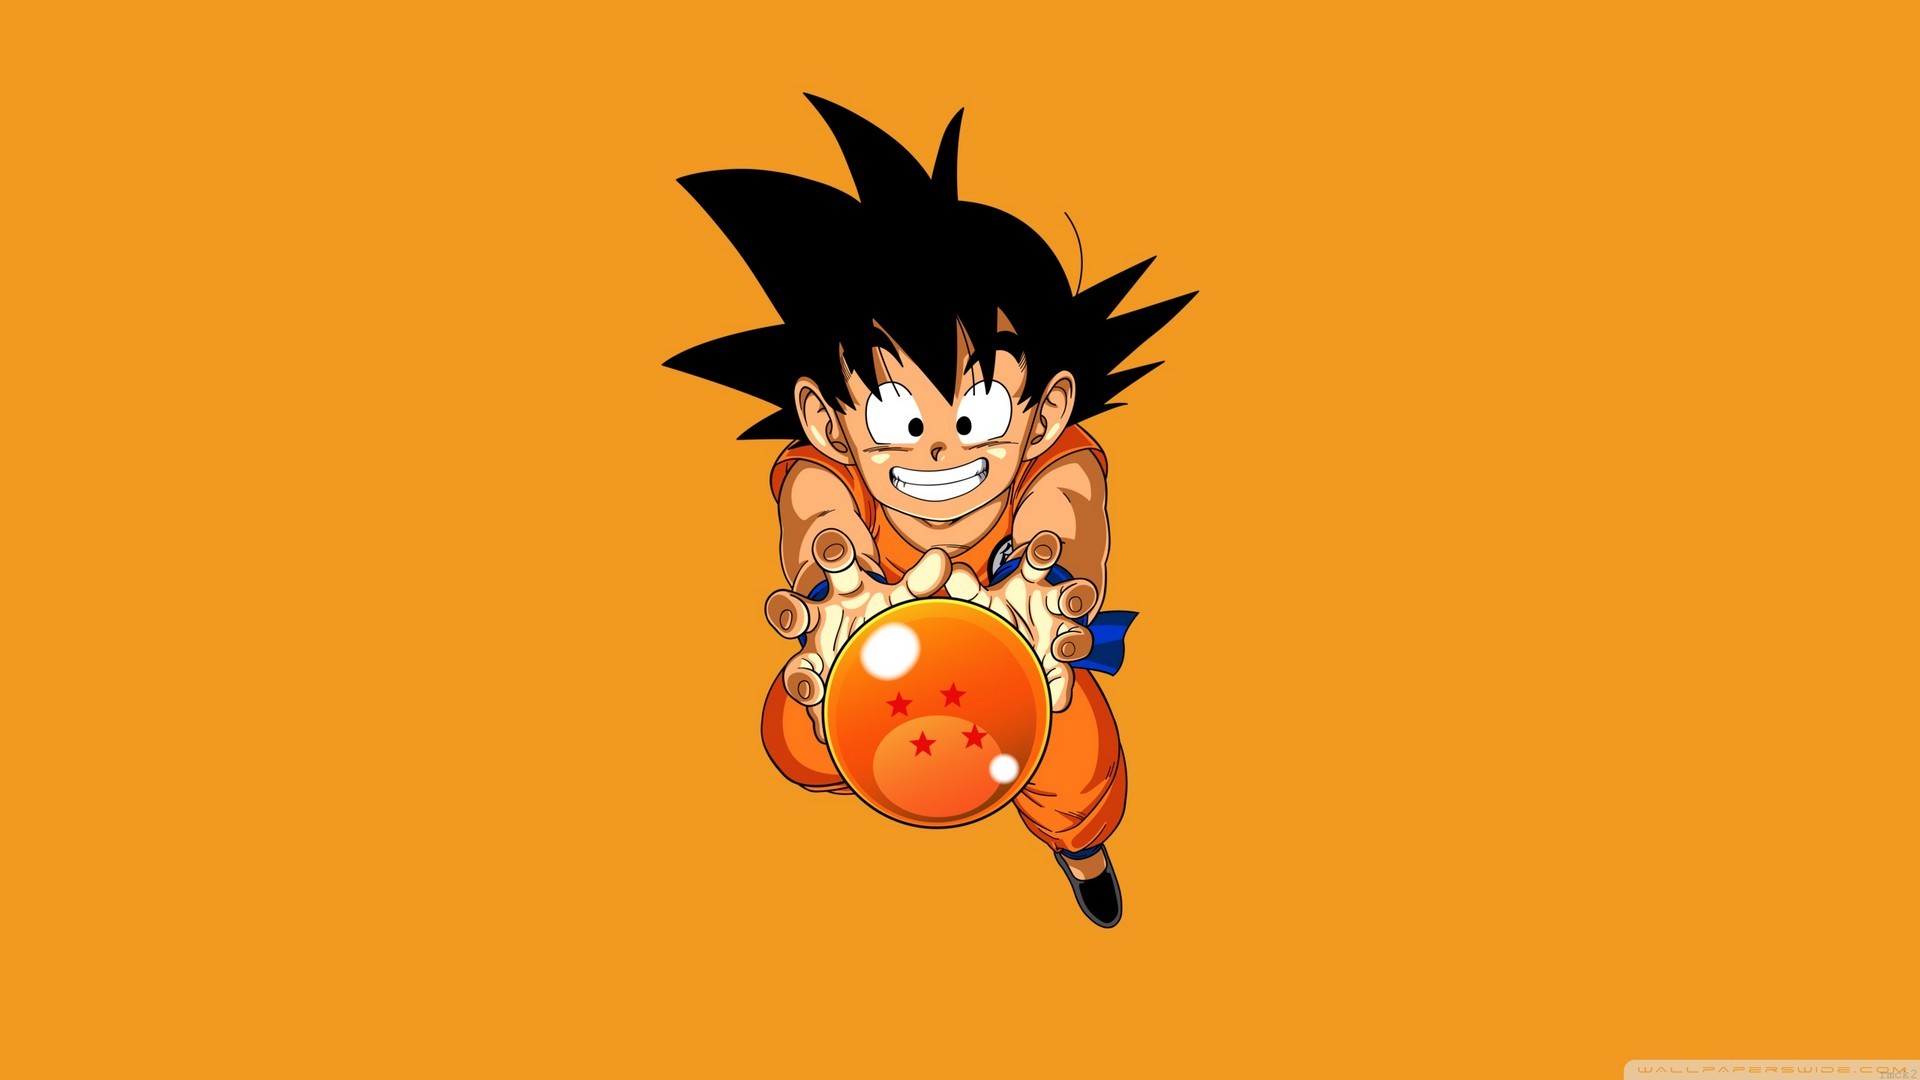 Kid Goku Desktop Wallpaper with image resolution 1920x1080 pixel. You can use this wallpaper as background for your desktop Computer Screensavers, Android or iPhone smartphones